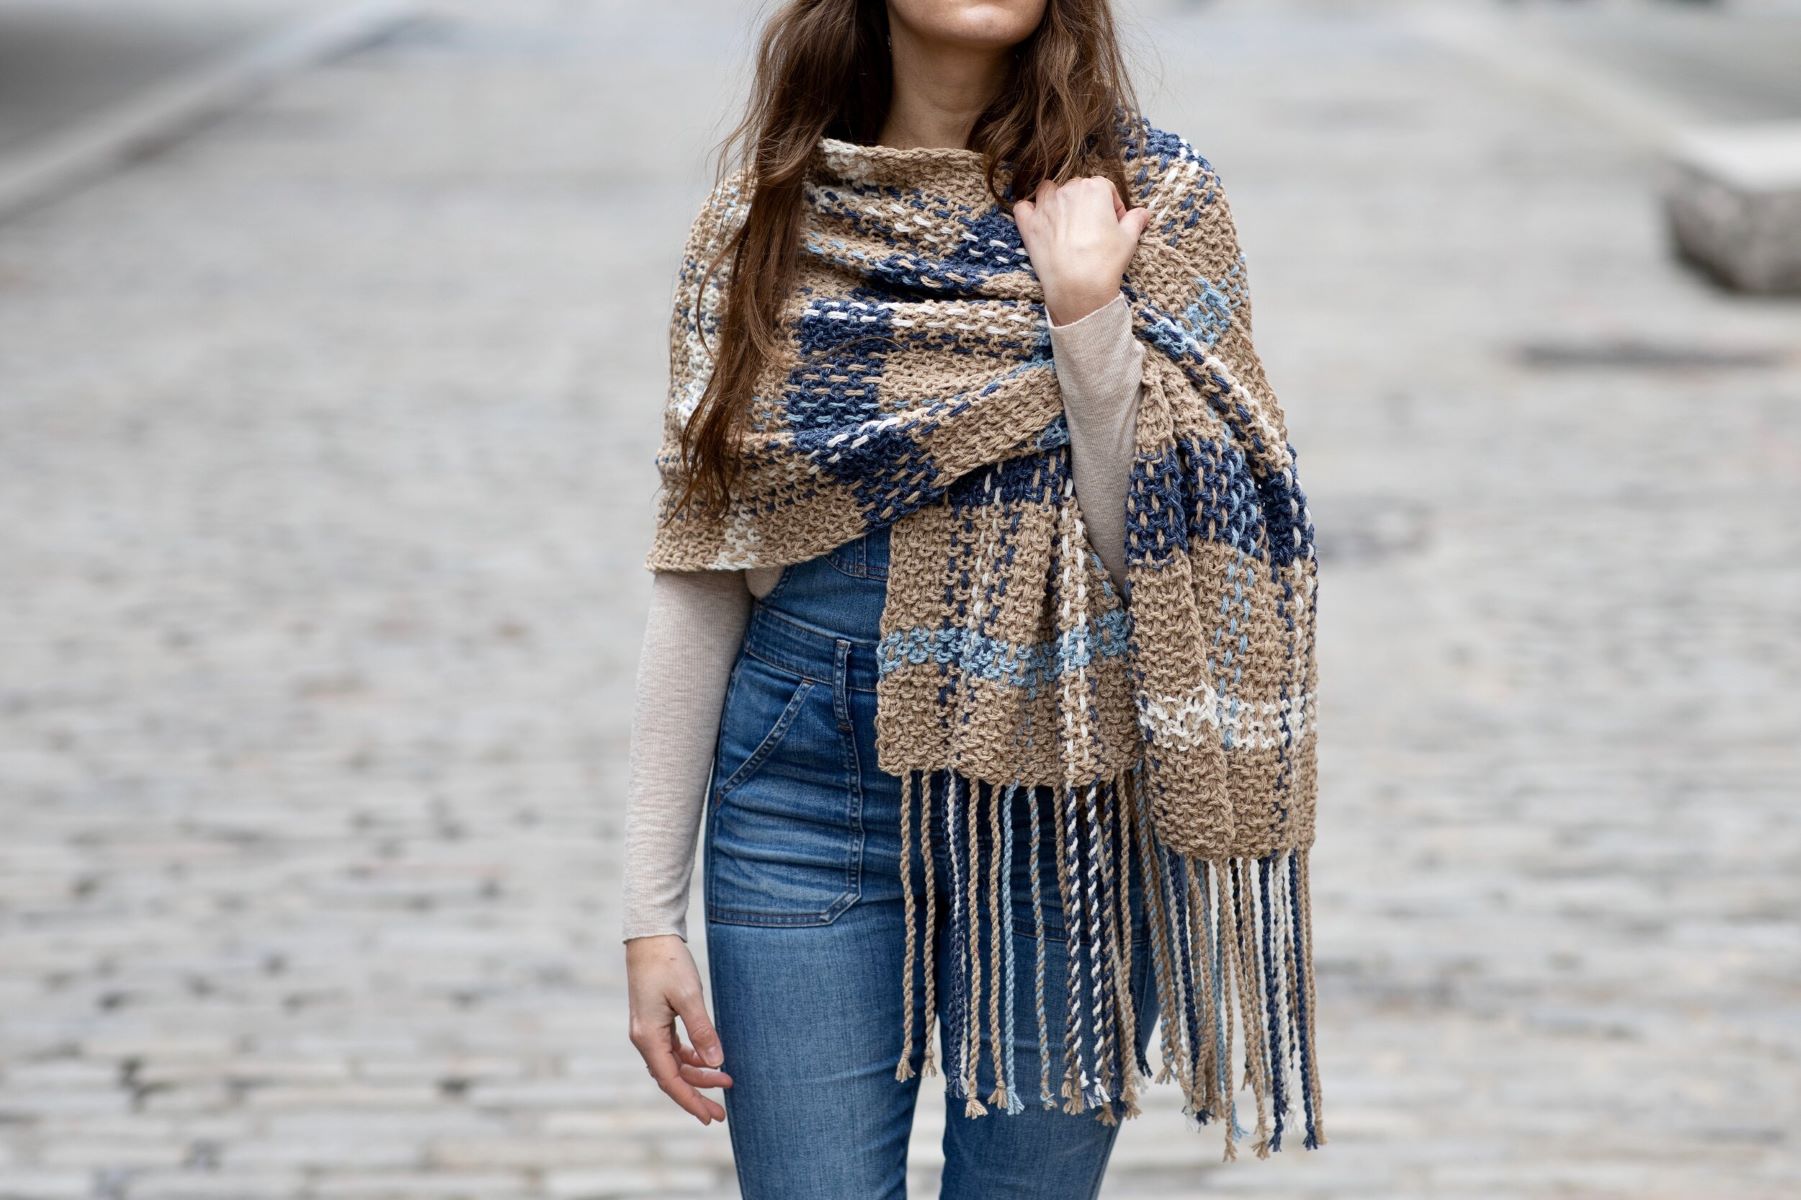 How To Make A Blanket Scarf